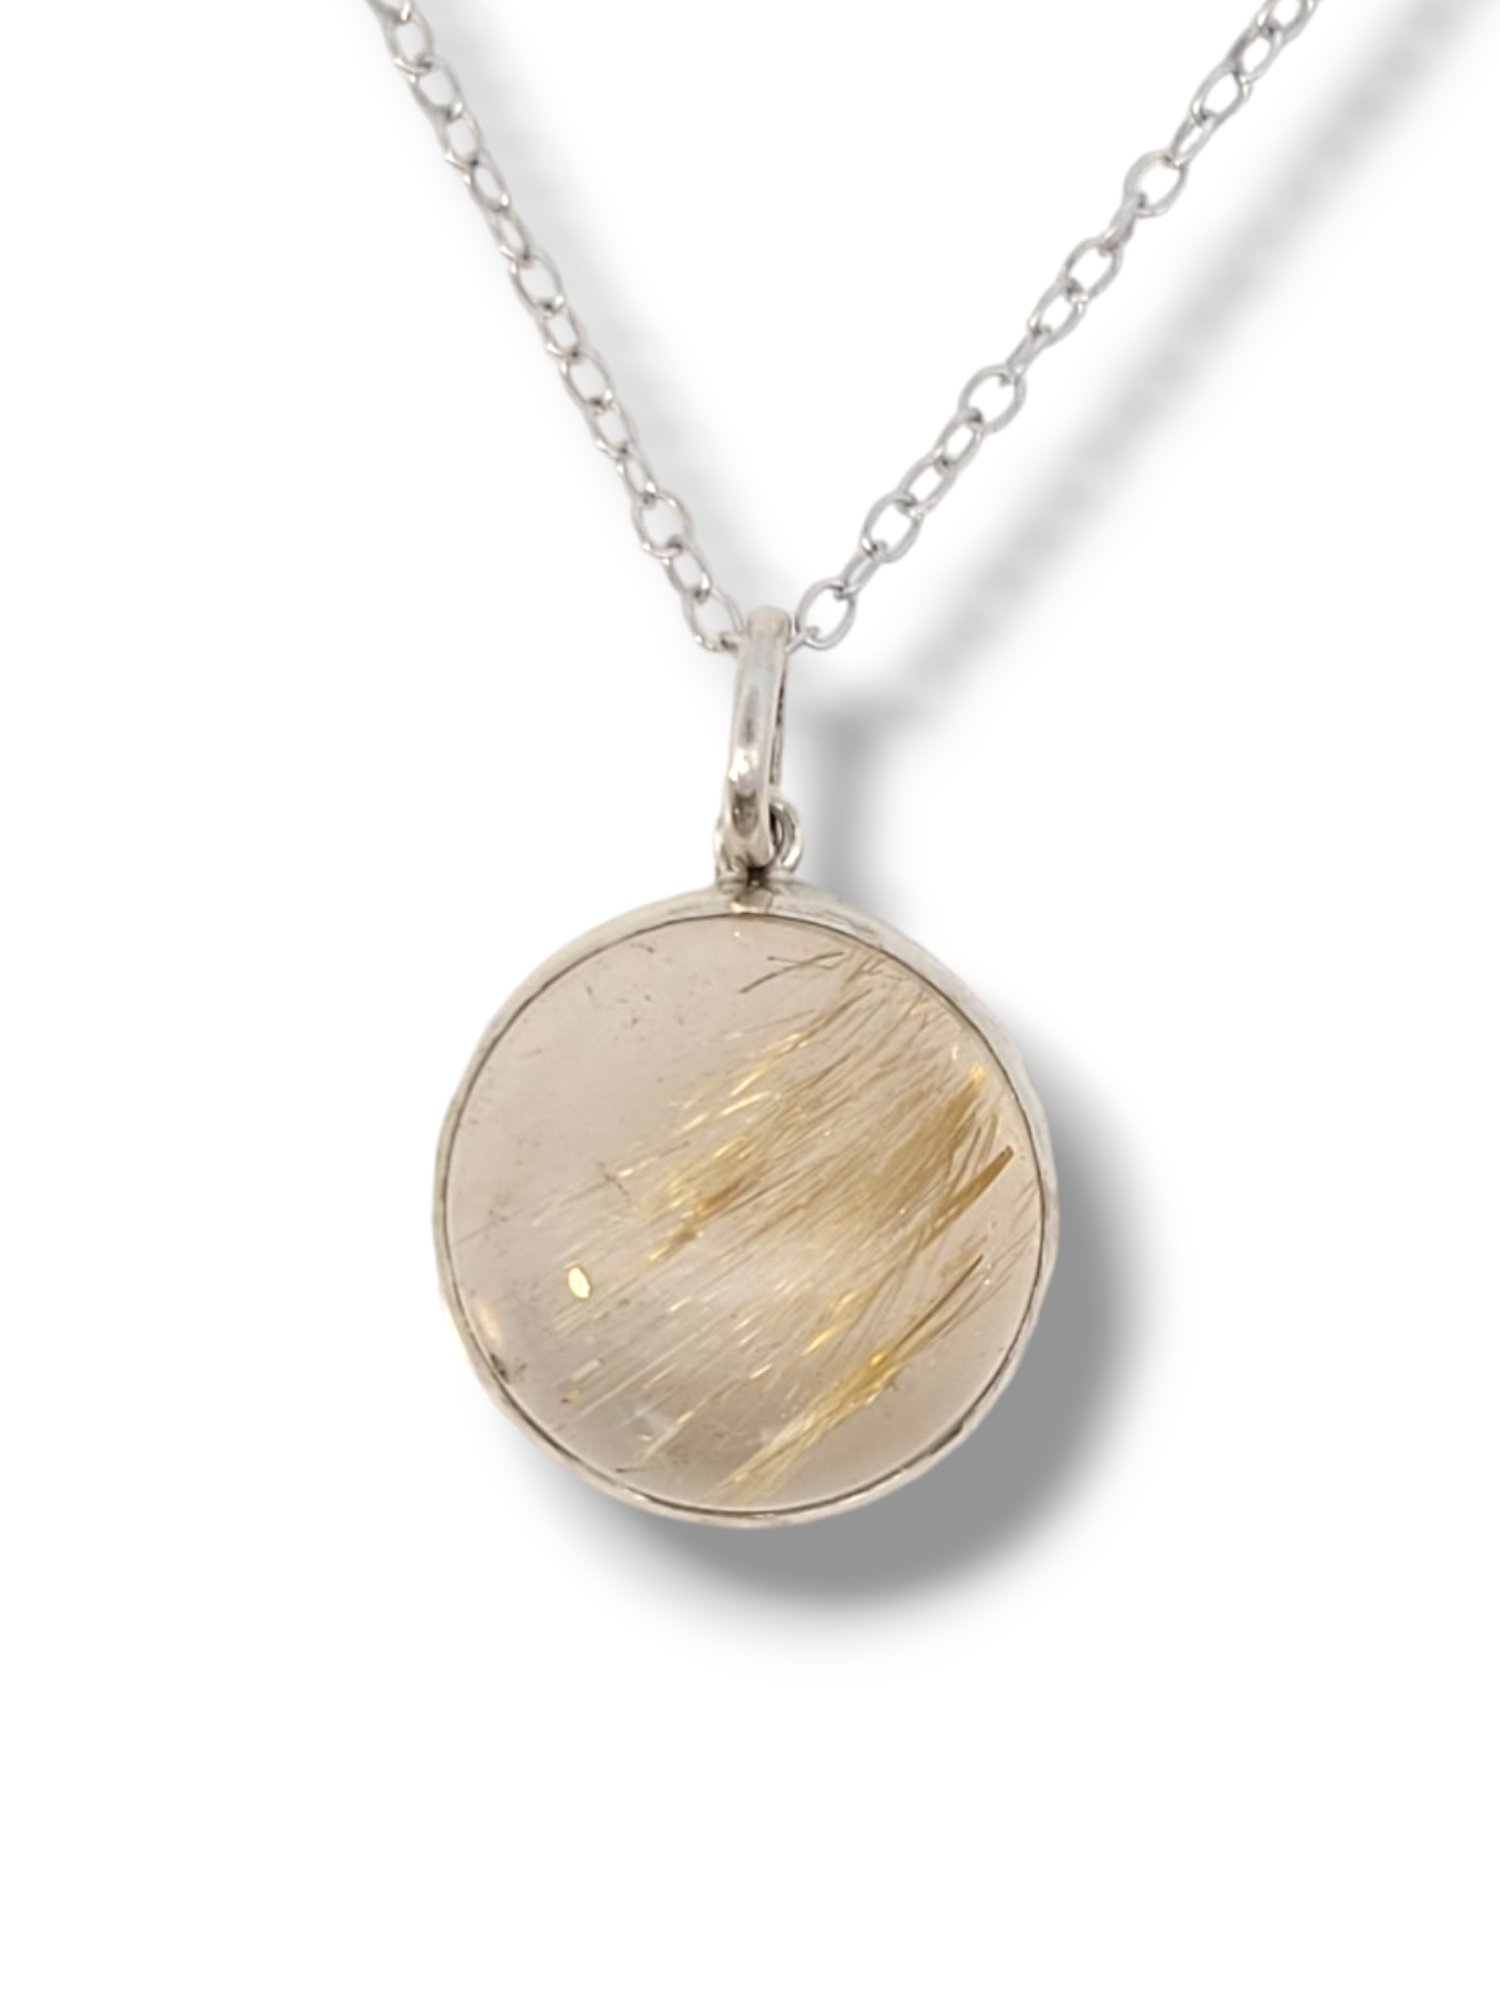 Gold Rutilated Quartz and  Sterling Silver Round Pendant